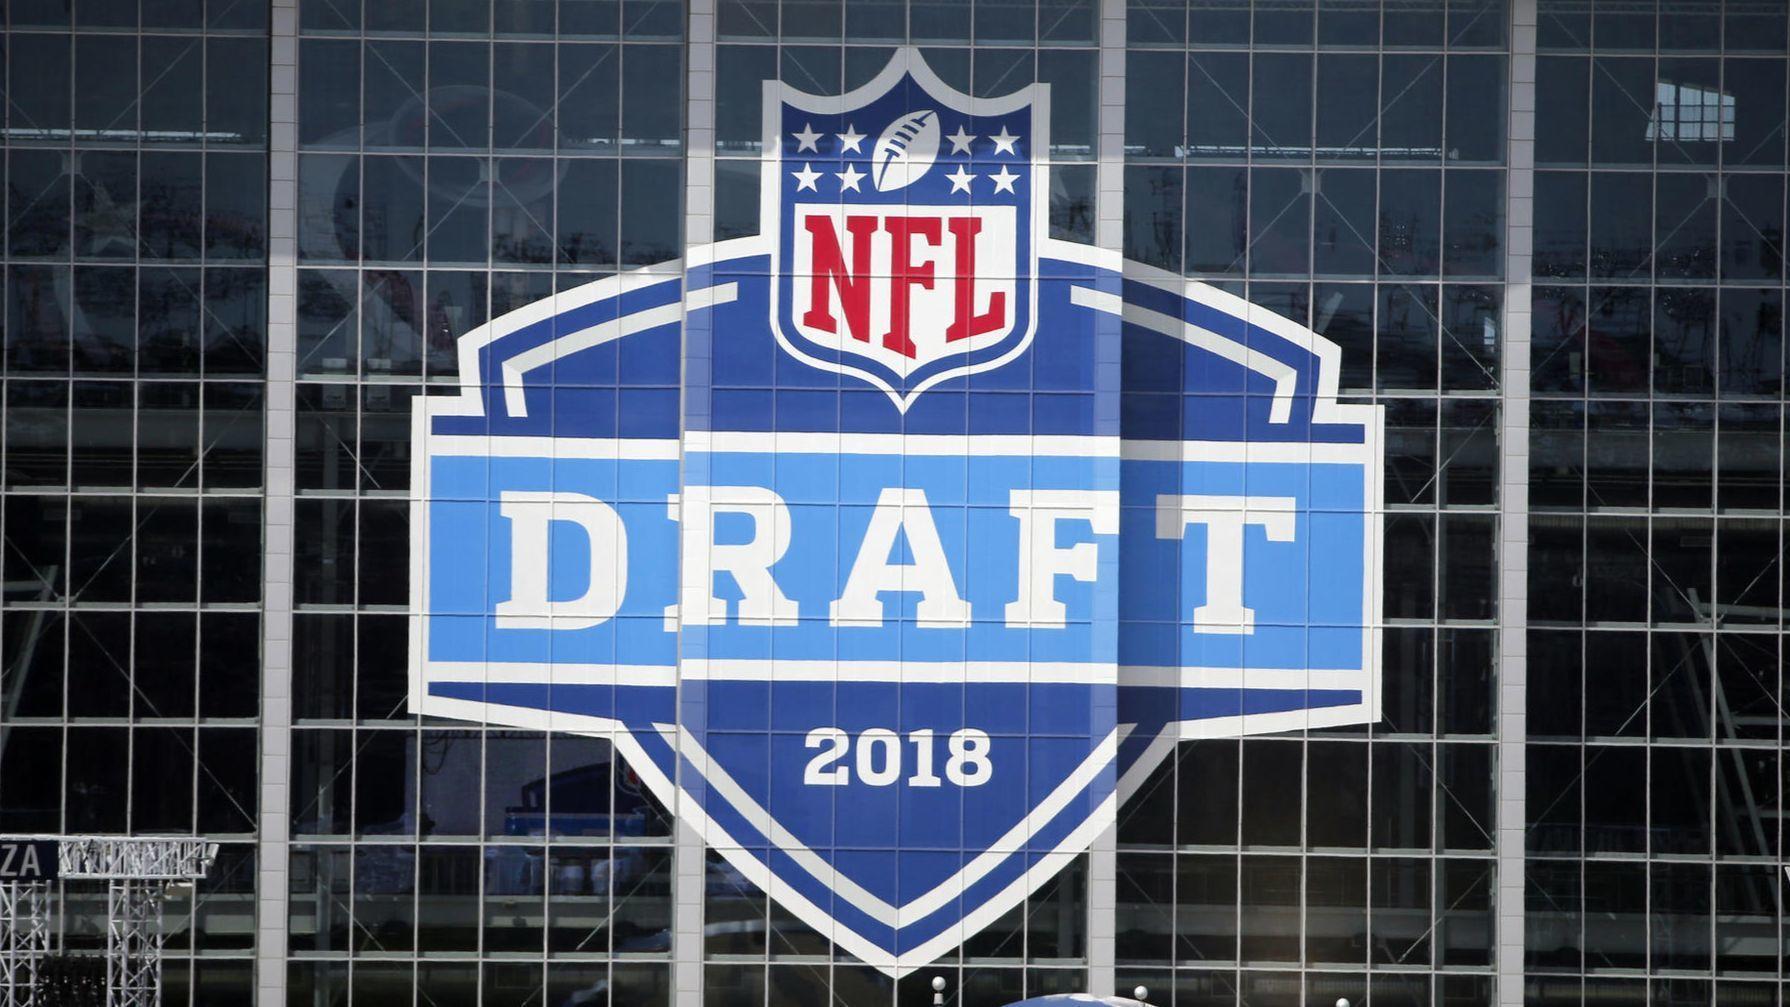 ct-spt-bears-nfl-draft-questions-20180421